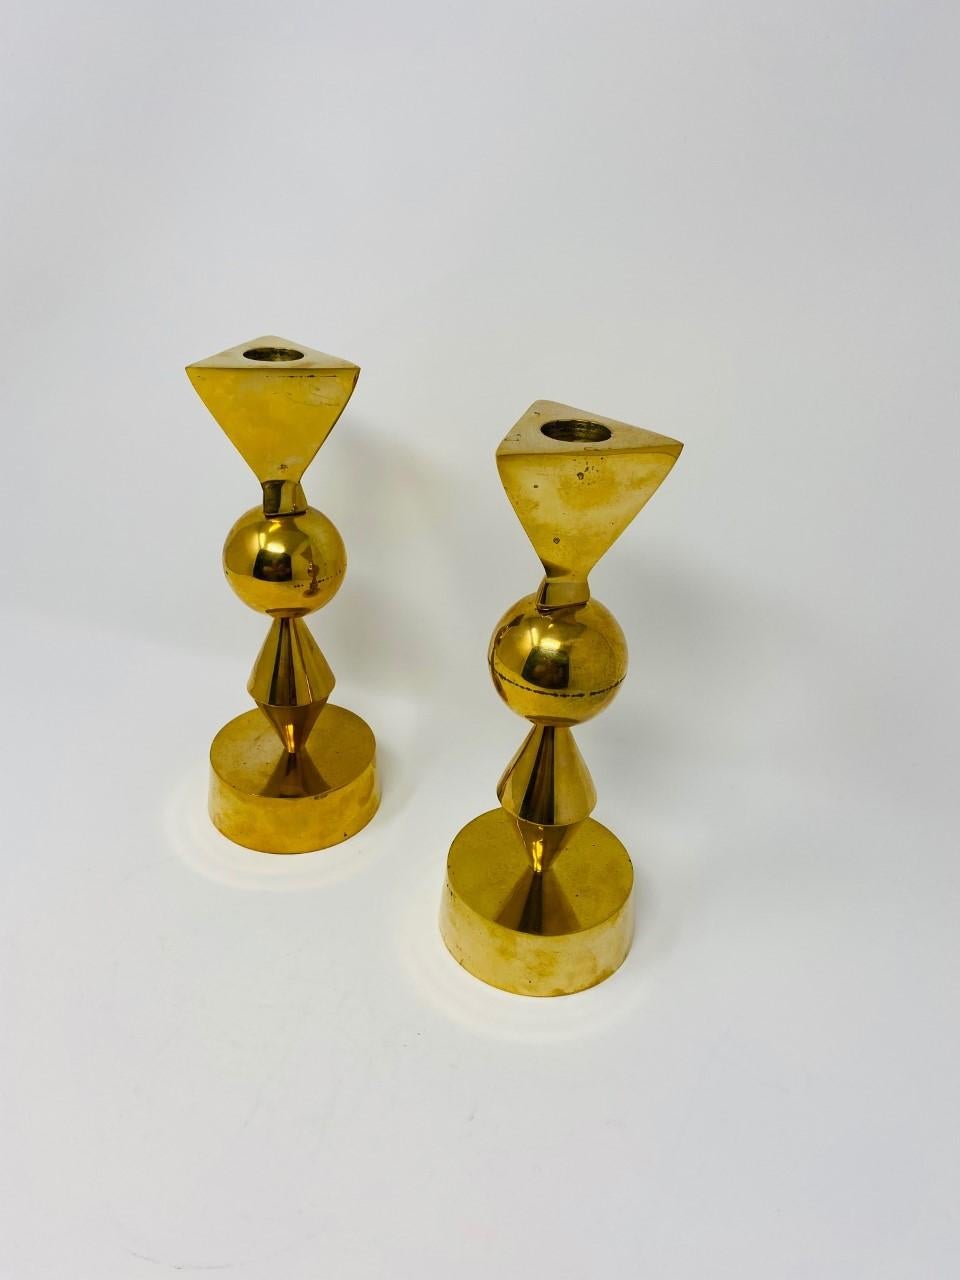 Mid-20th Century Vintage Rare Brass Candle Holders in the style of Parzinger-Mueck-Cary